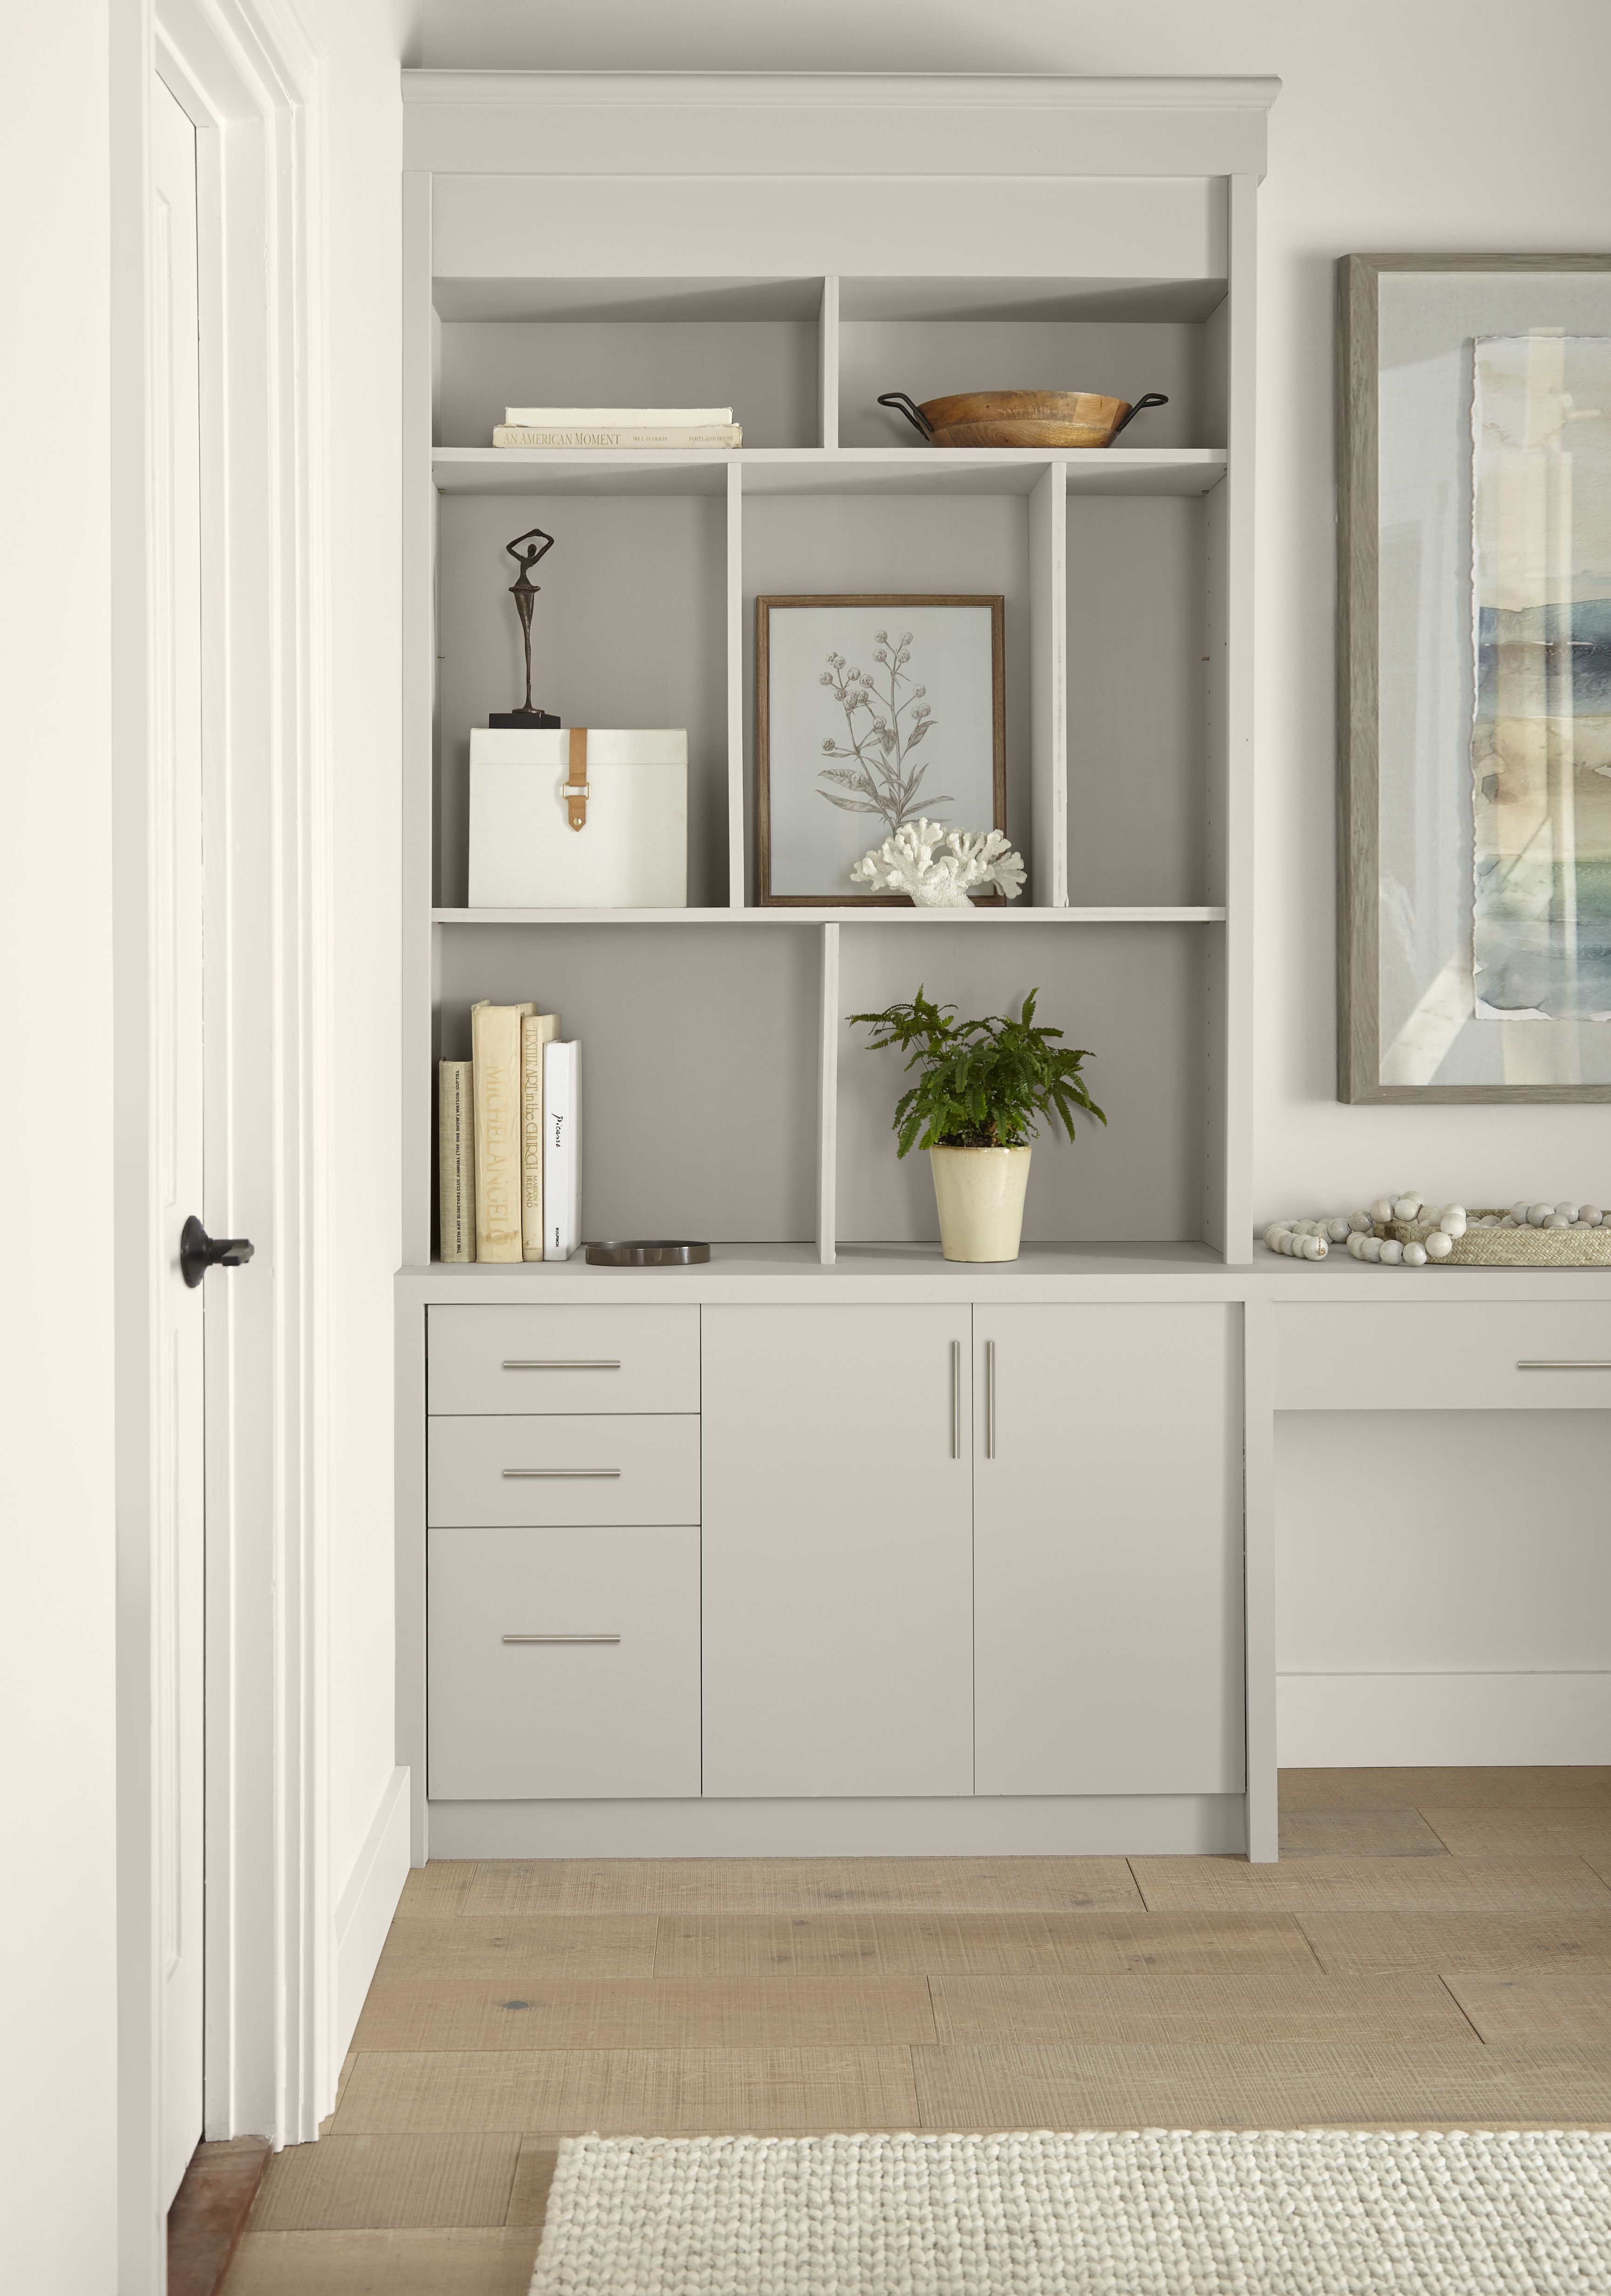 A built-in bookcase painted in Tranquil Gray styled with various décor and accessories